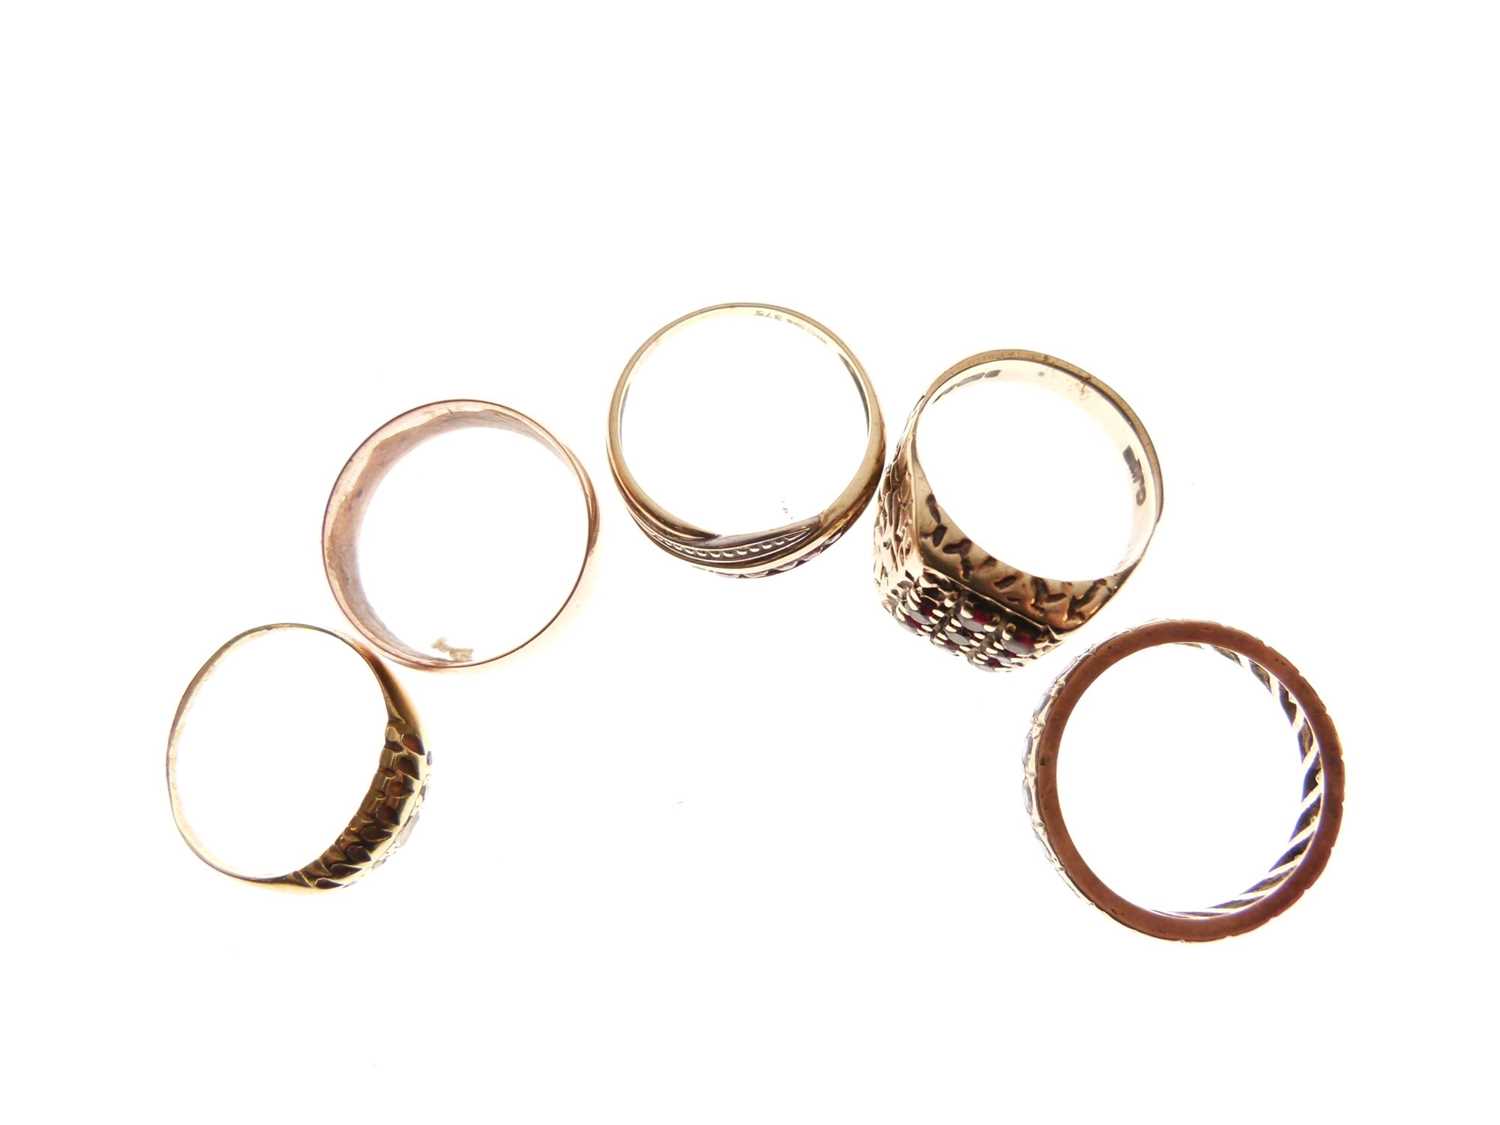 Three 9ct gold rings - Image 2 of 5